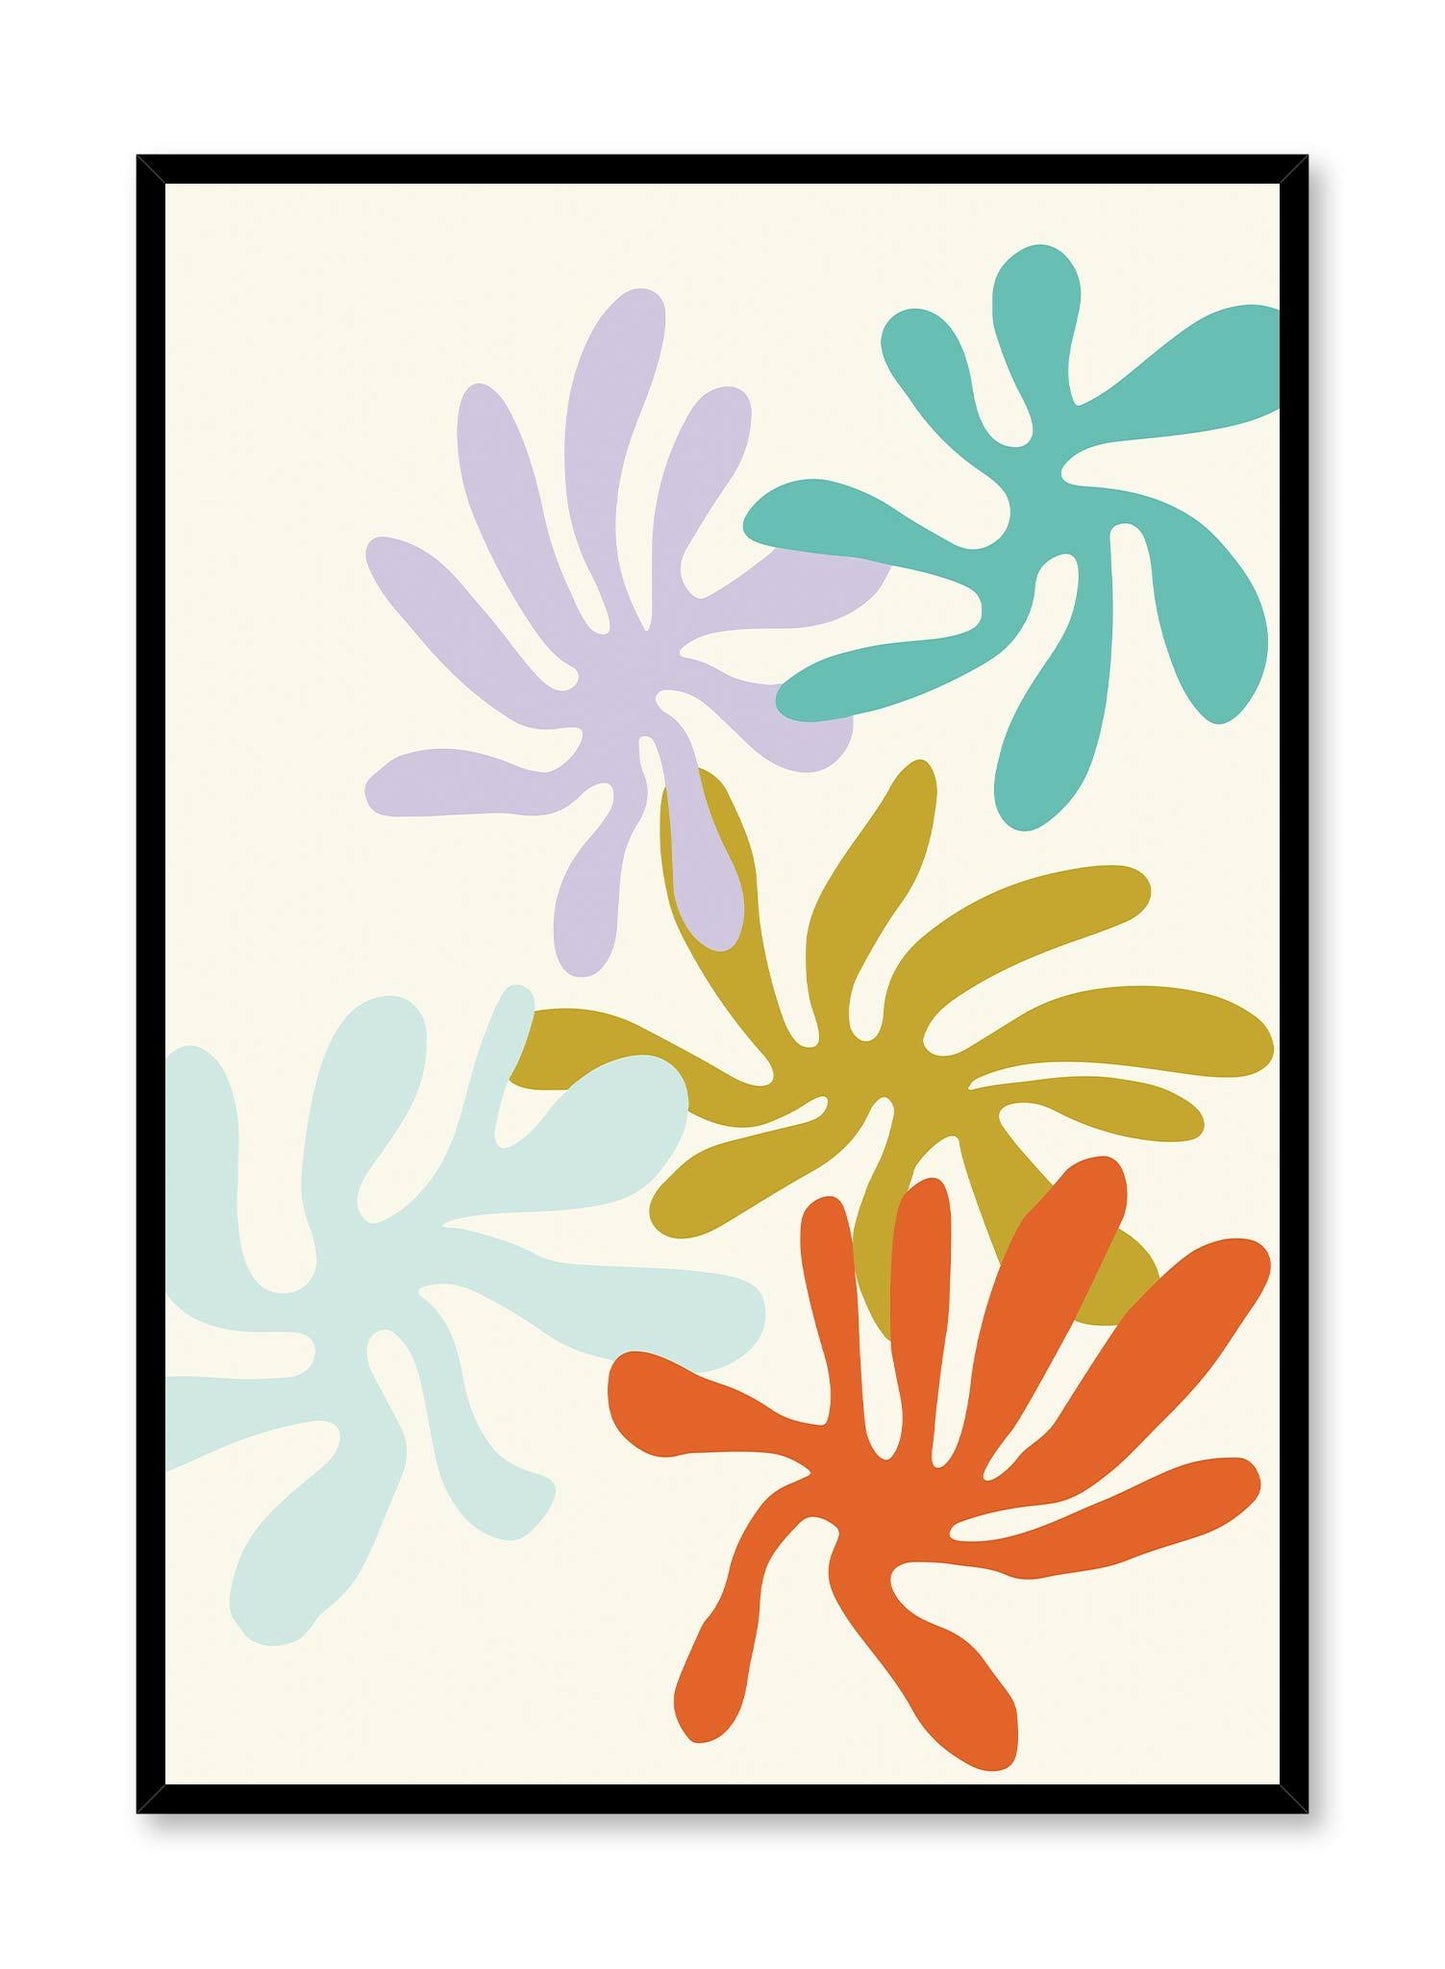 Nifty is a minimalist illustration poster of a retro floral pattern by Opposite Wall.